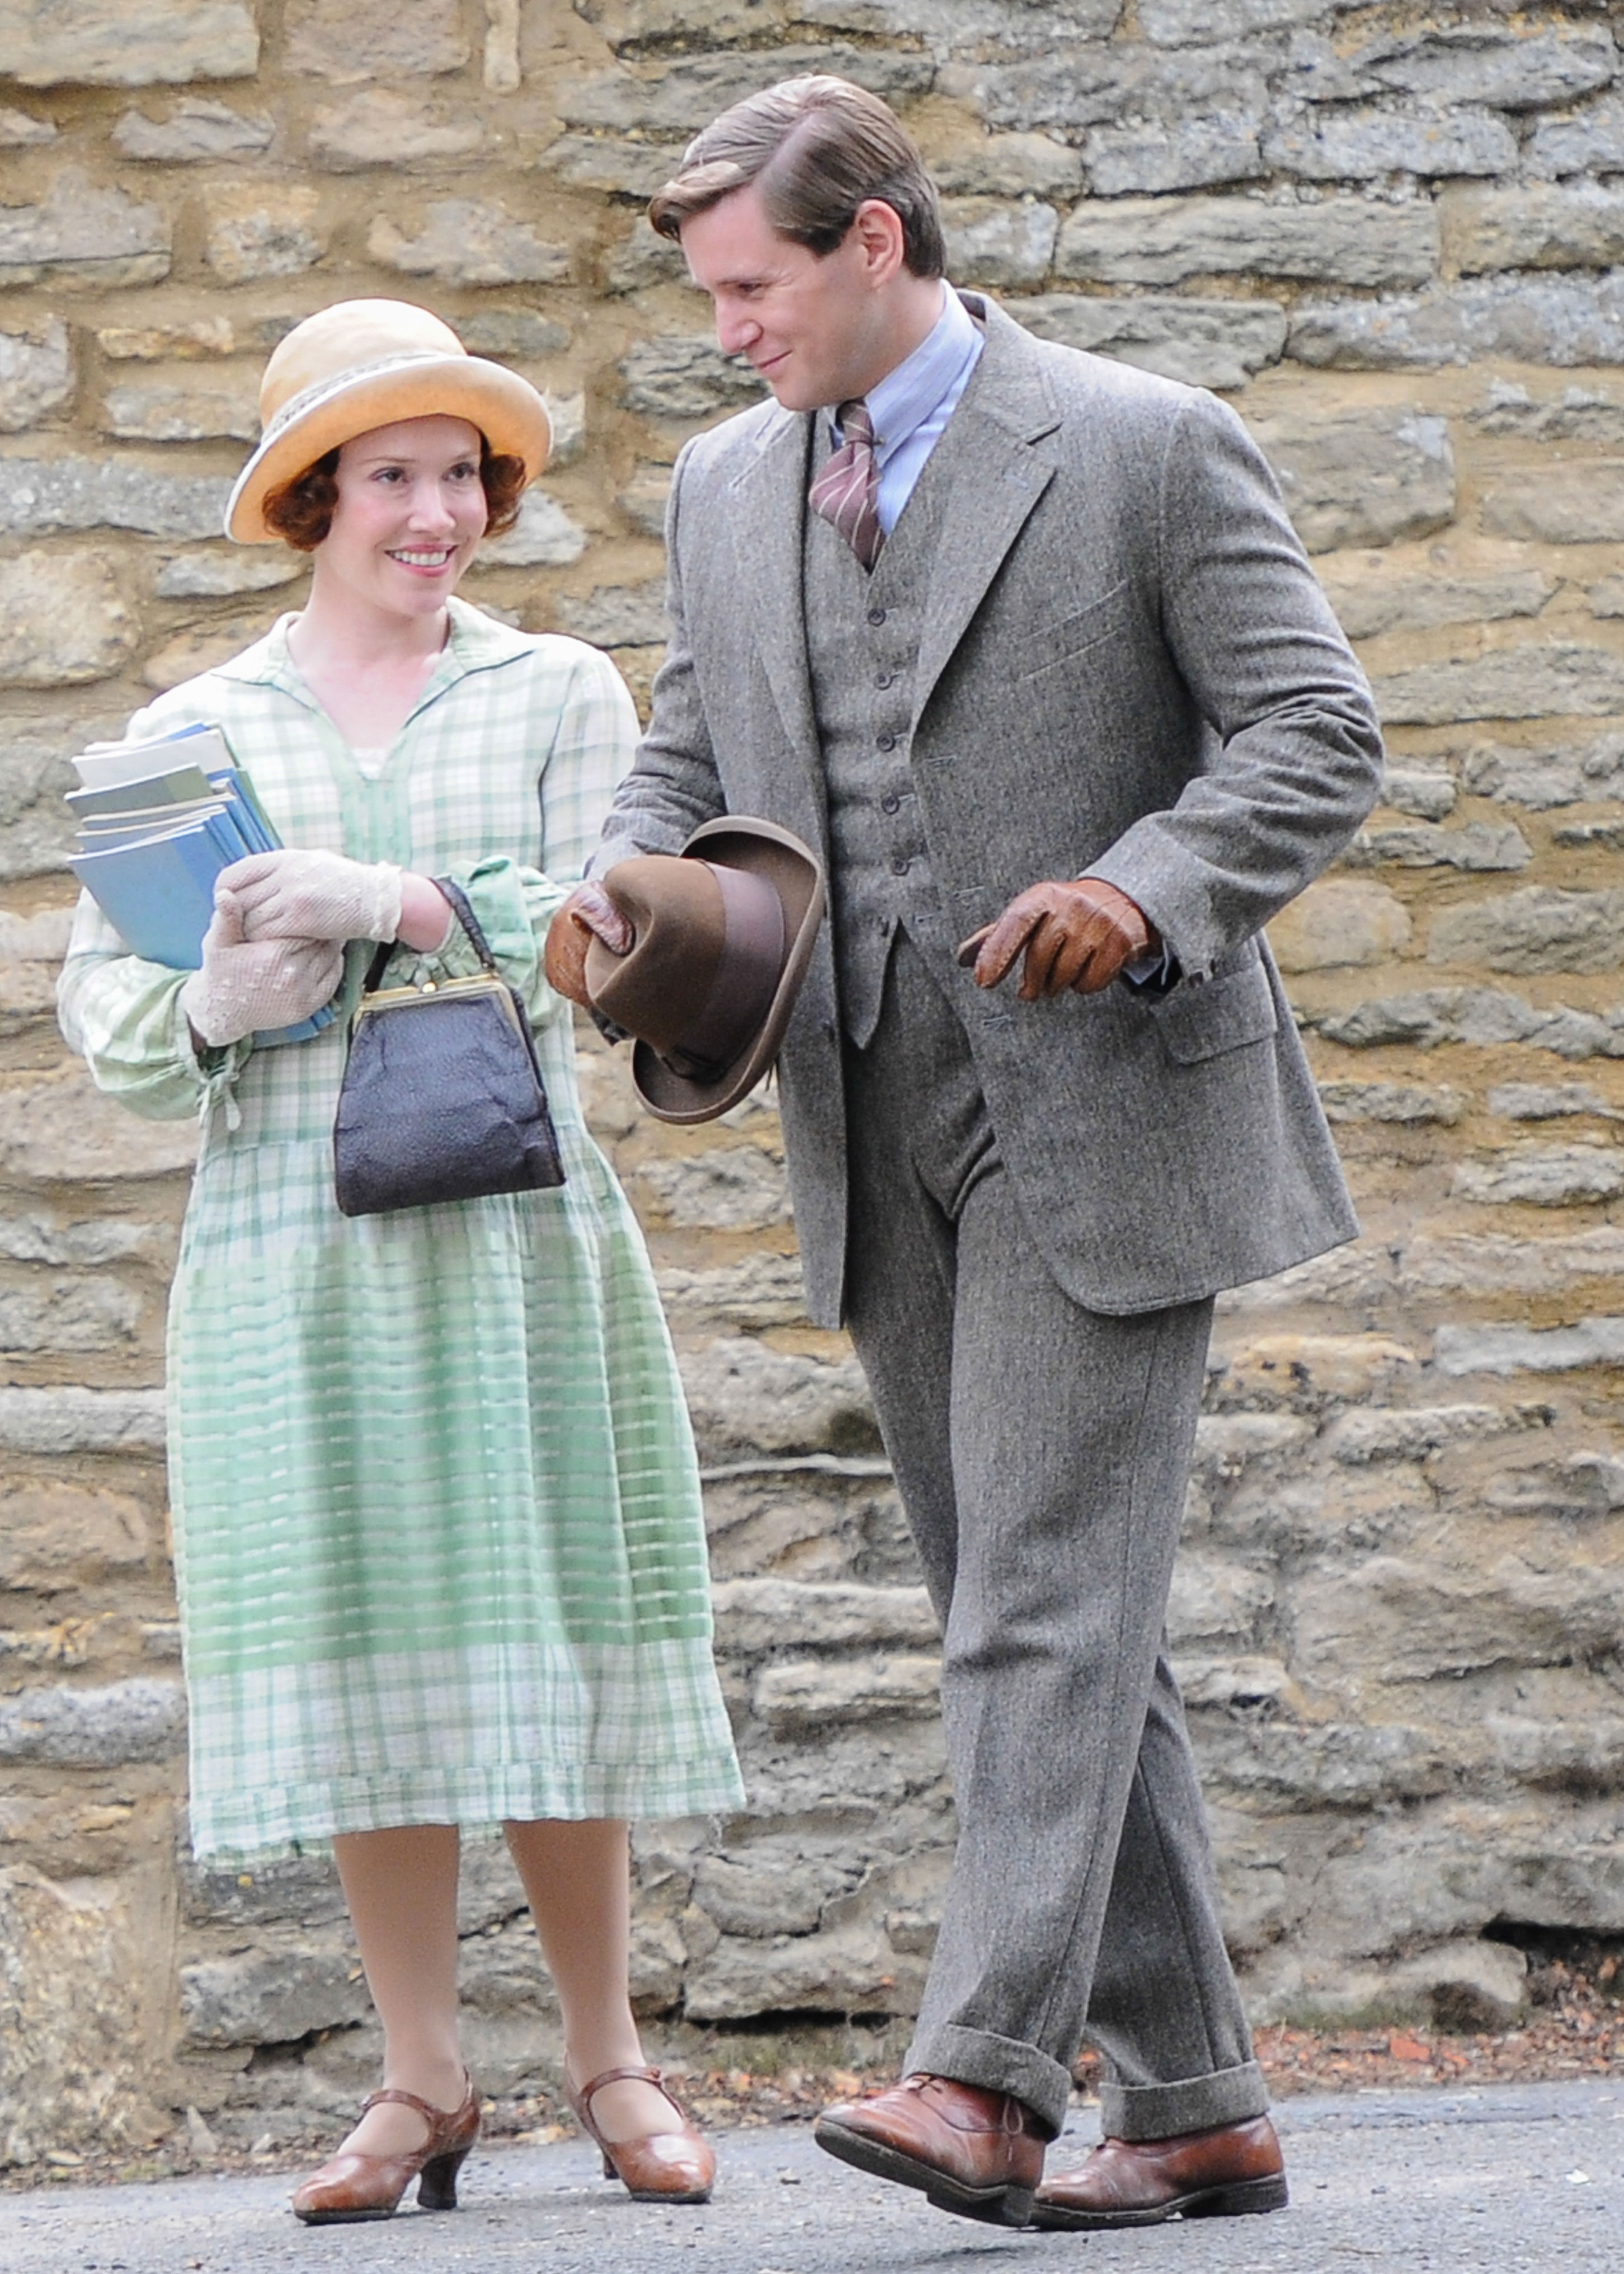 <p>After years of grief following the death of his wife, Lady Sybil, Tom Branson (played by Allen Leech) got a new love interest for a spell: Sarah Bunting (played by Daisy Lewis), a politically minded grammar school teacher with a working woman's wardrobe. She's seen here shooting with him for season 4.</p>